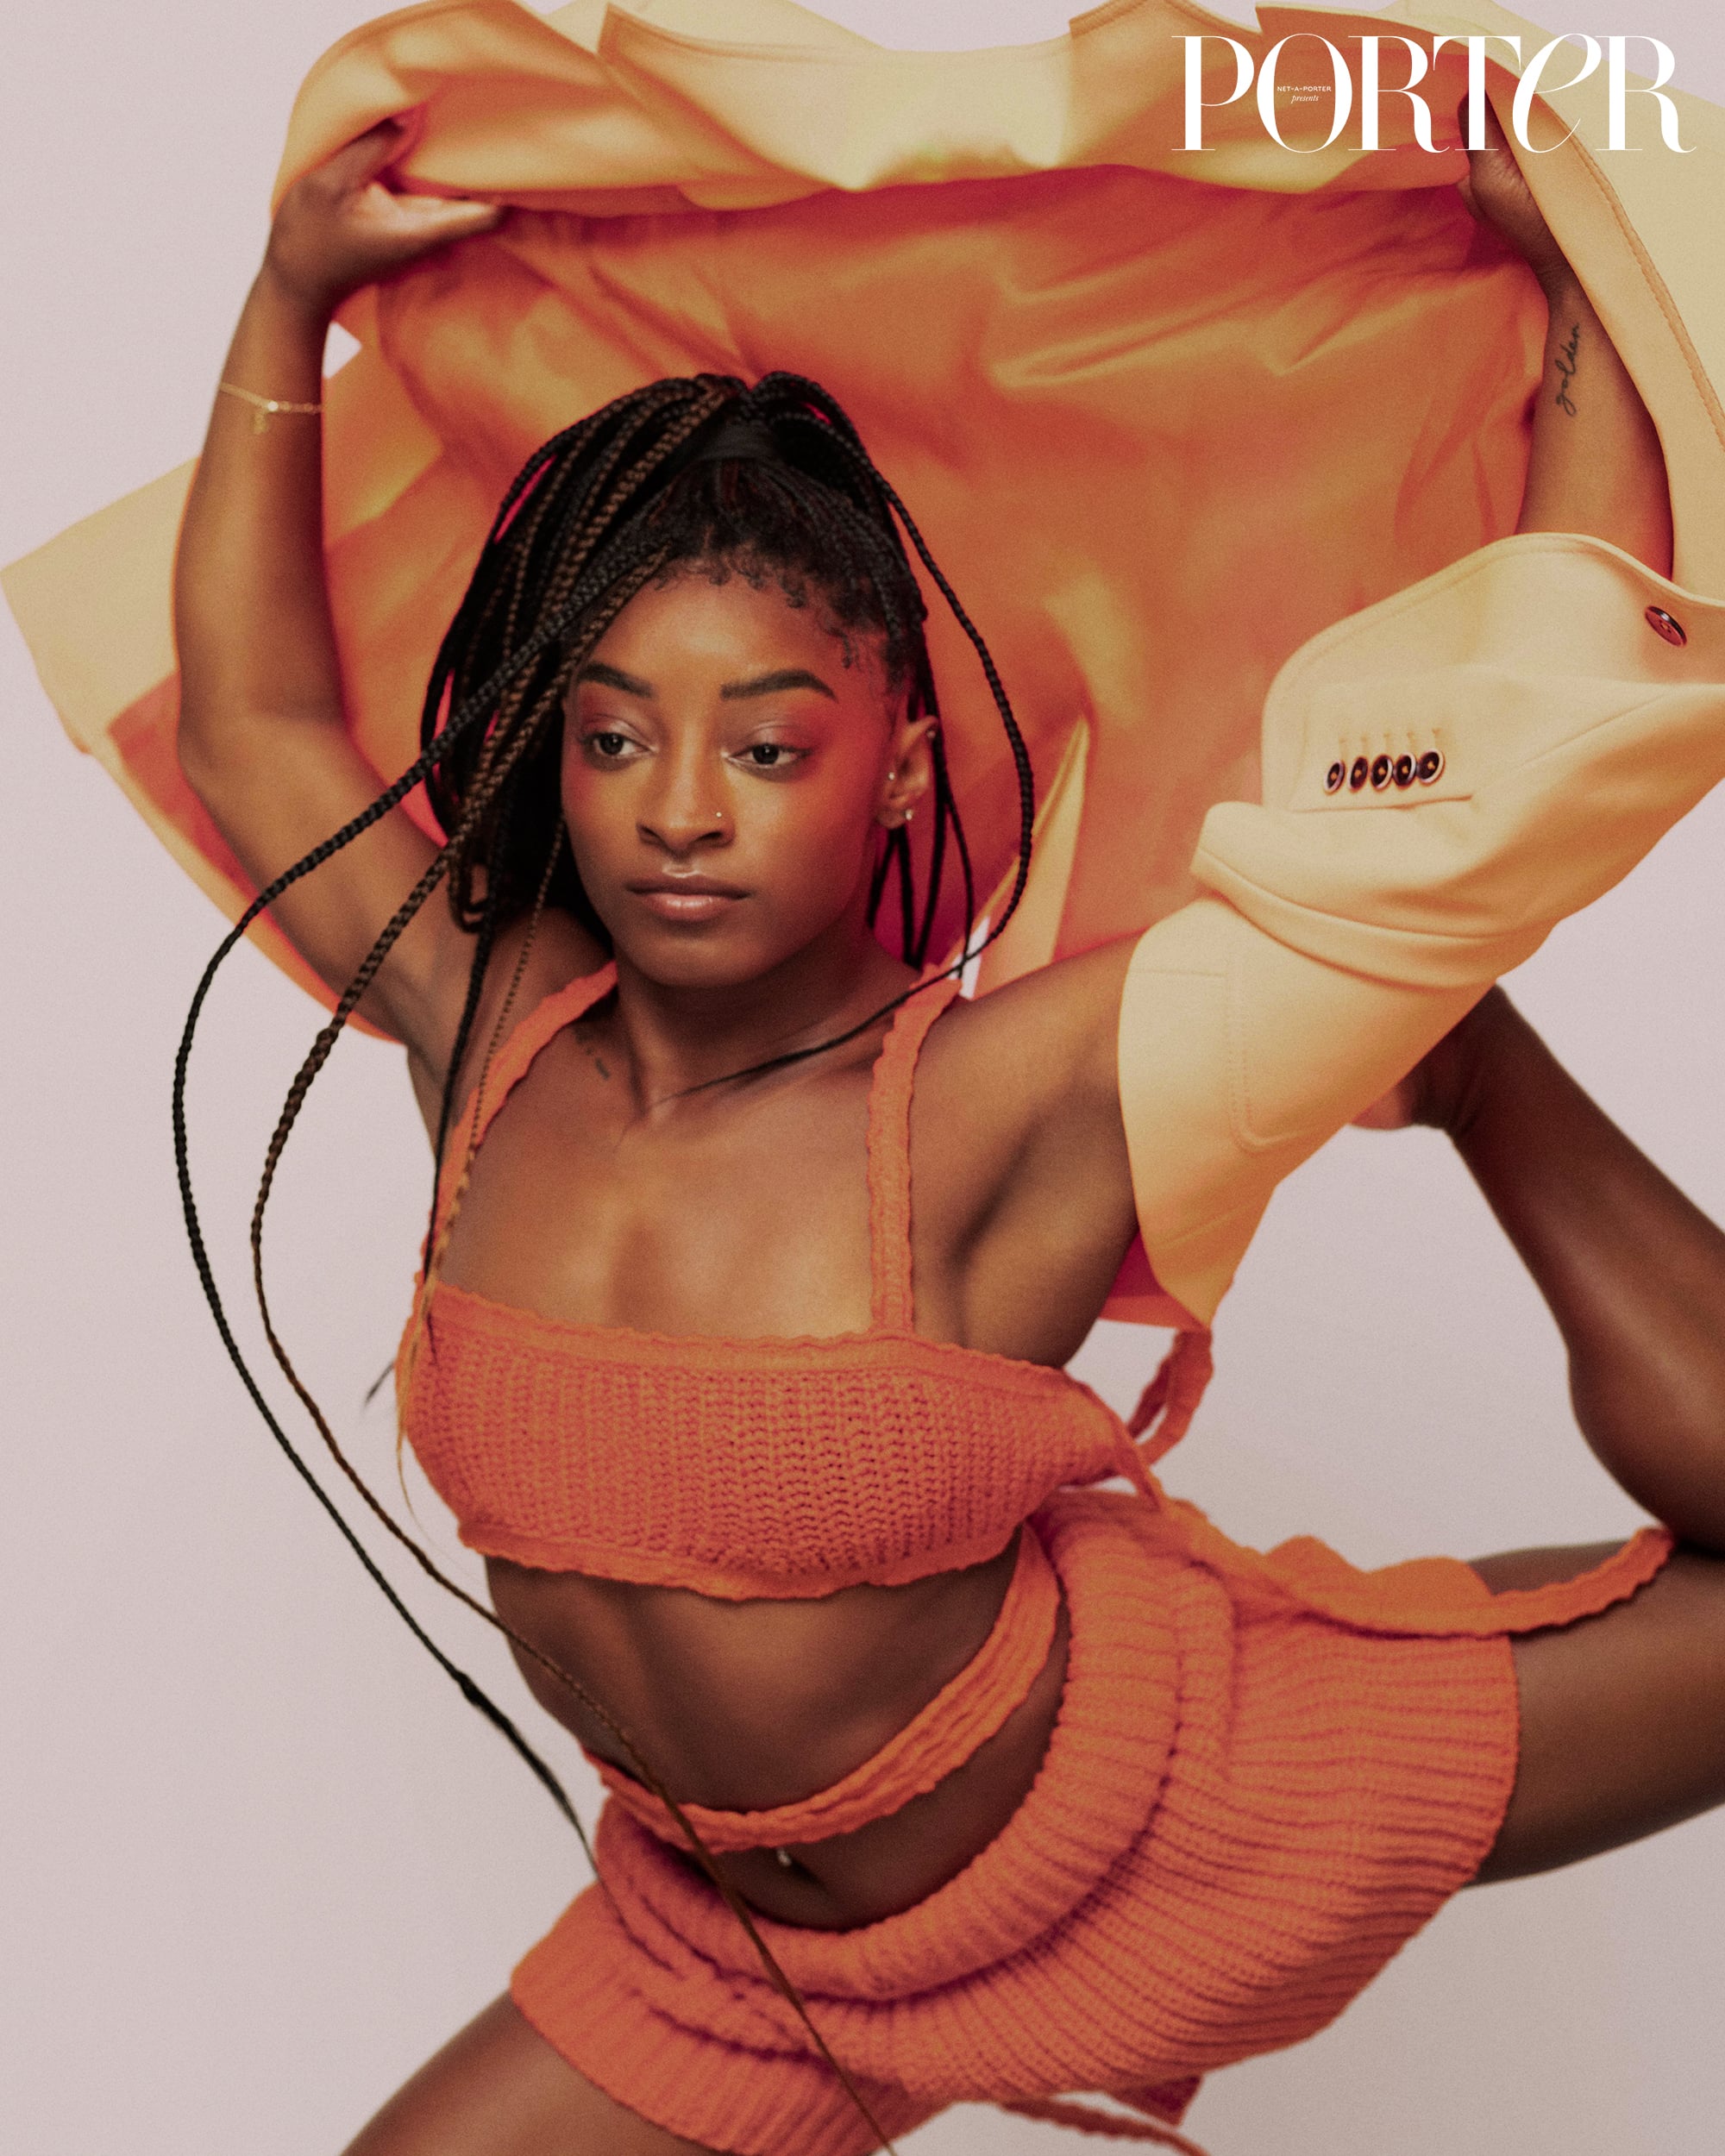 Simone Biles Stuns in Palazzo Pants and a Pink Bralette